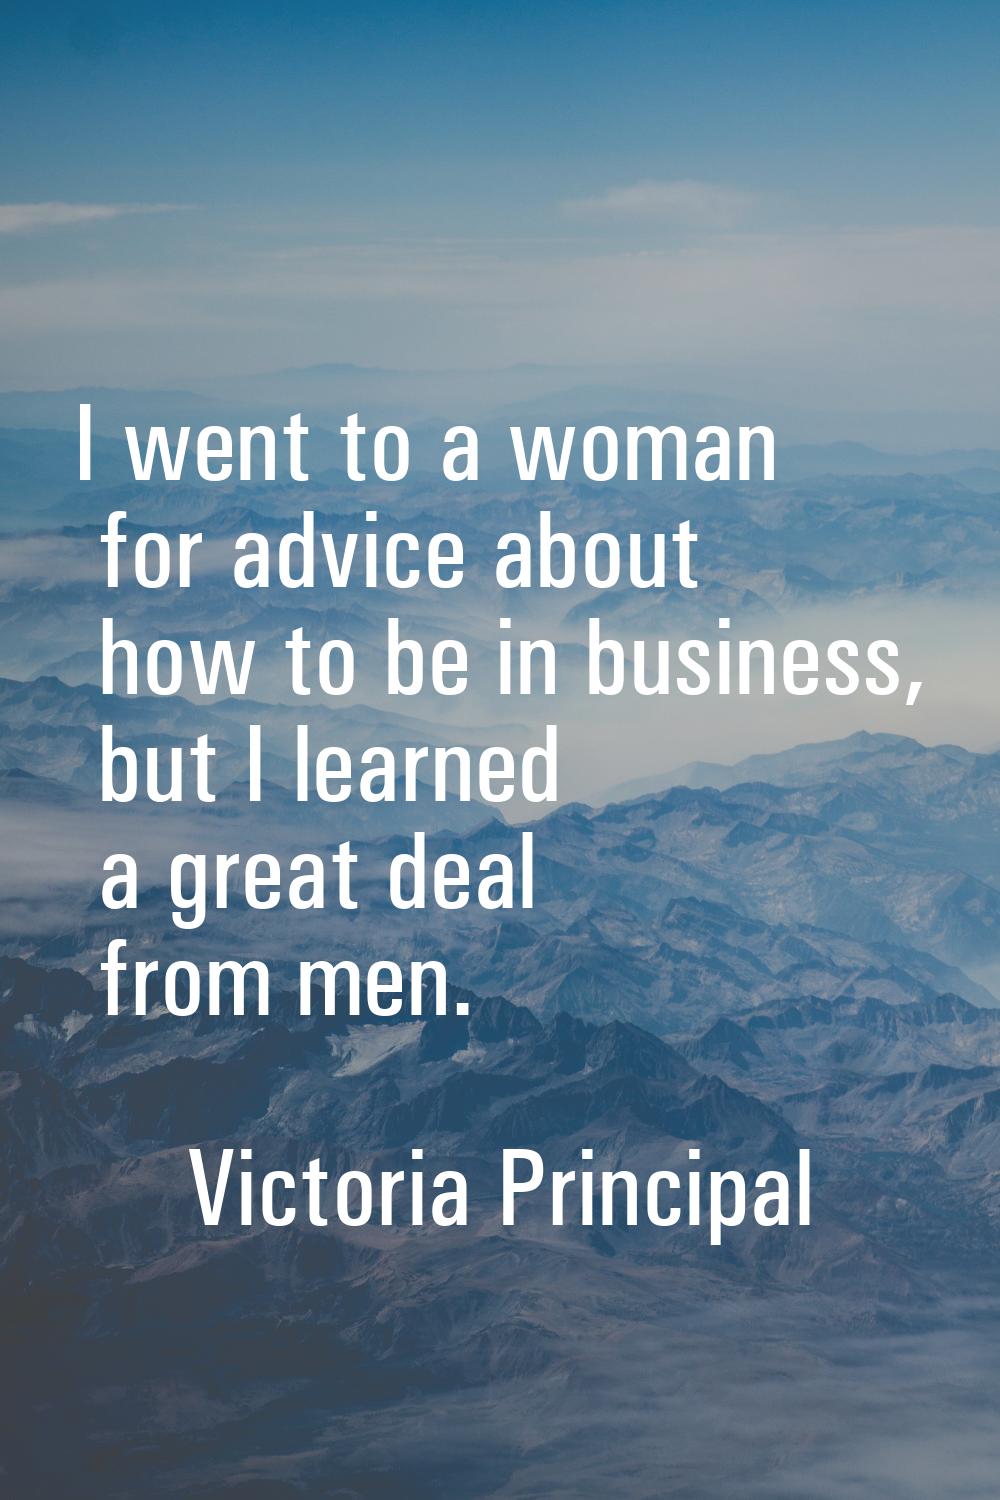 I went to a woman for advice about how to be in business, but I learned a great deal from men.